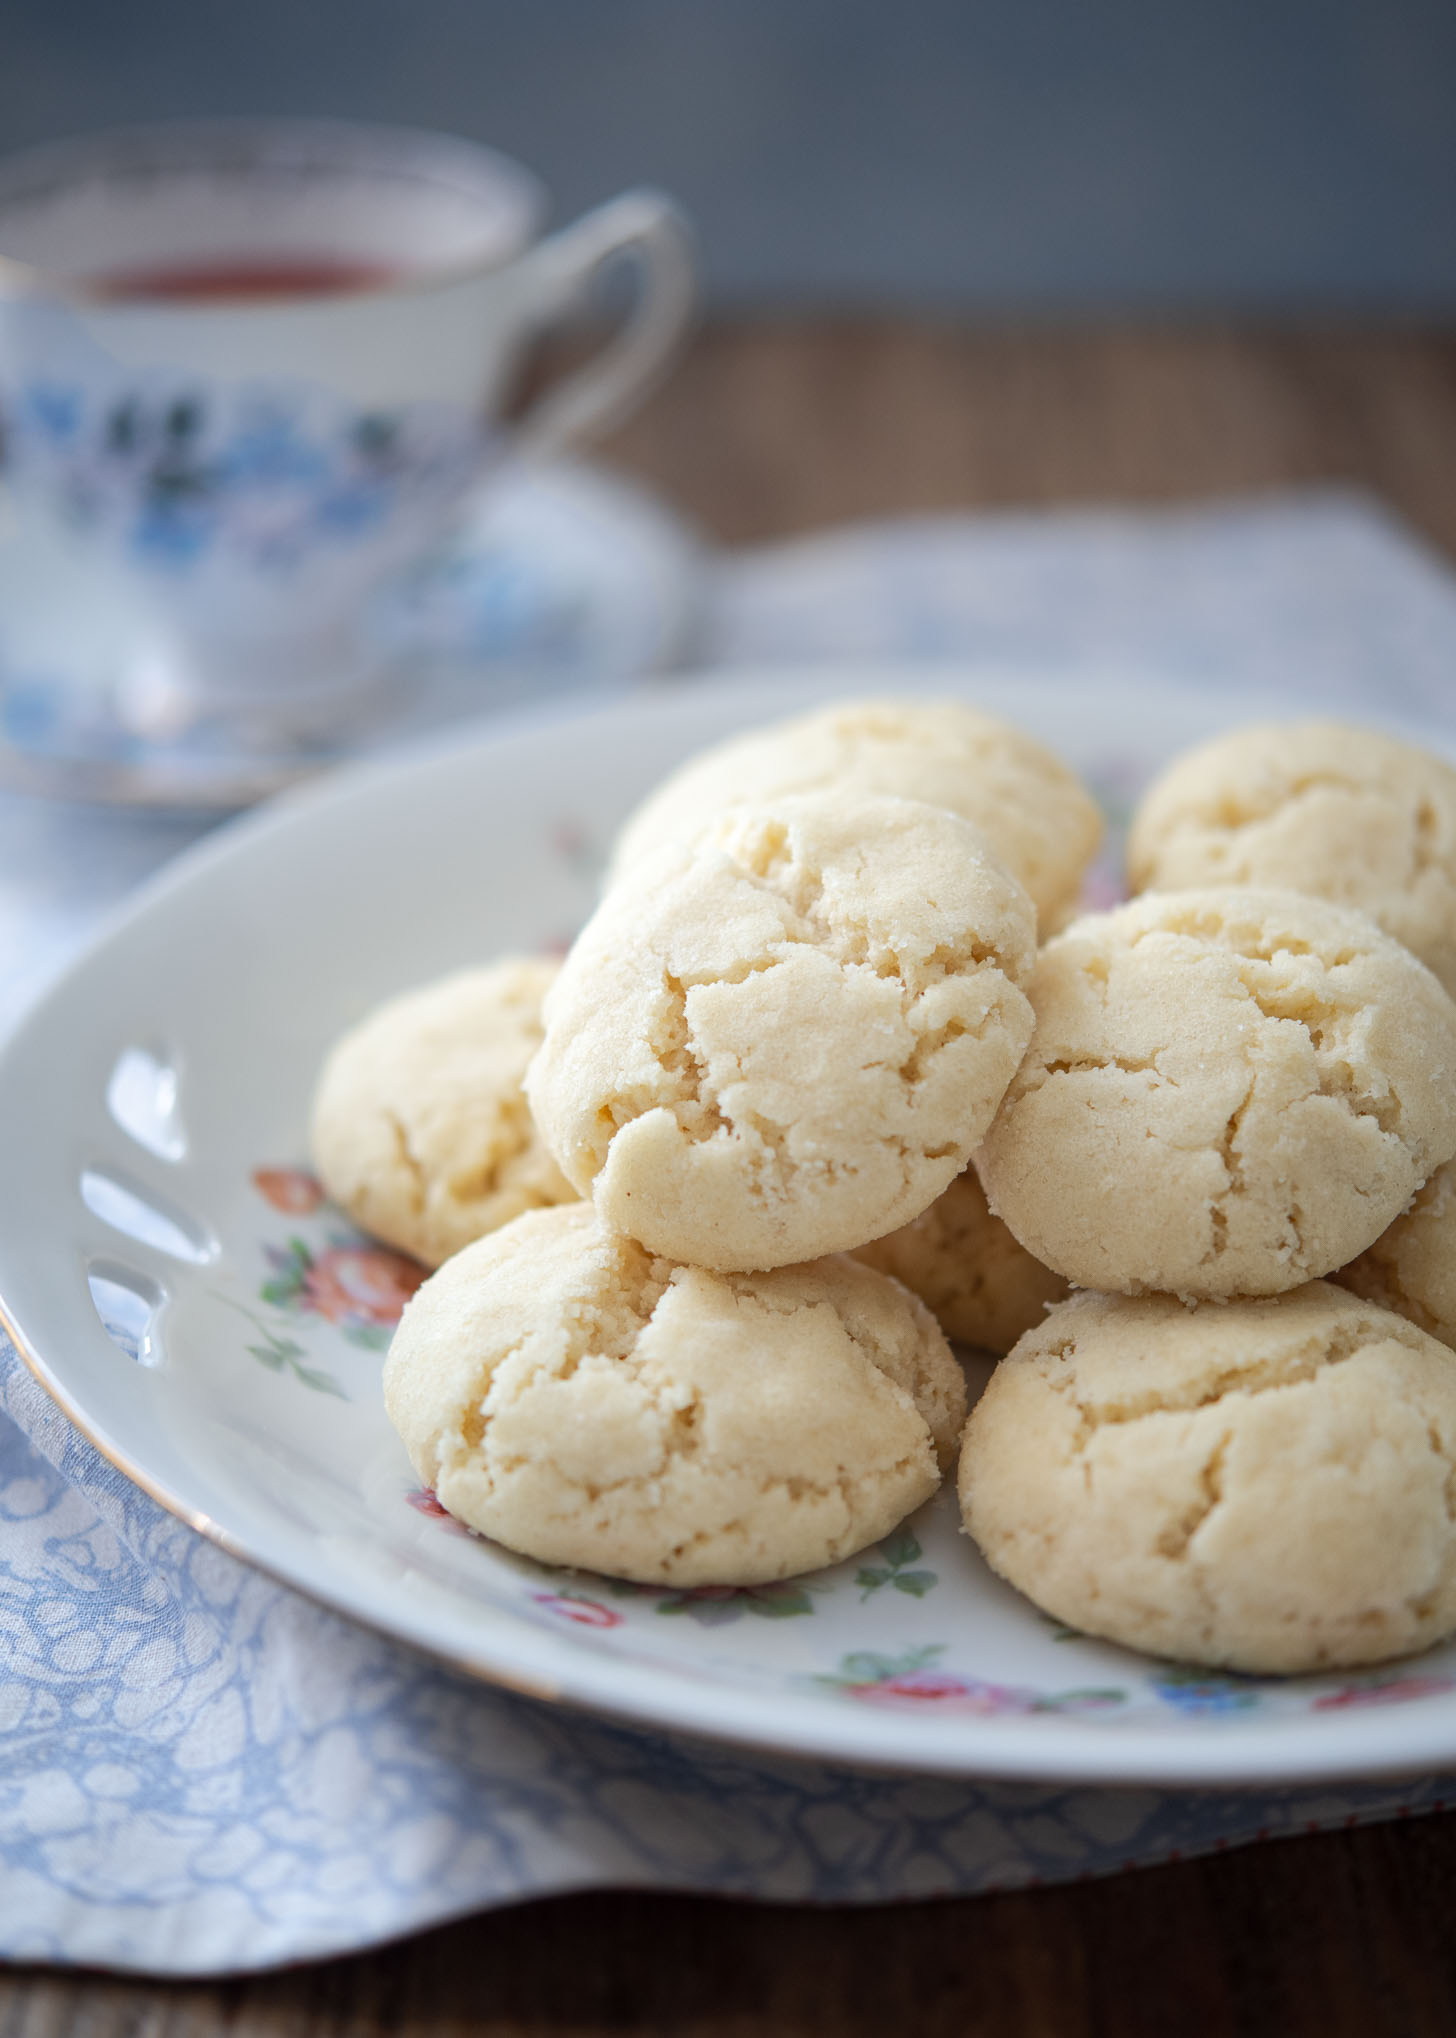 Swedish dream cookies are airy buttery with the cracked surface.